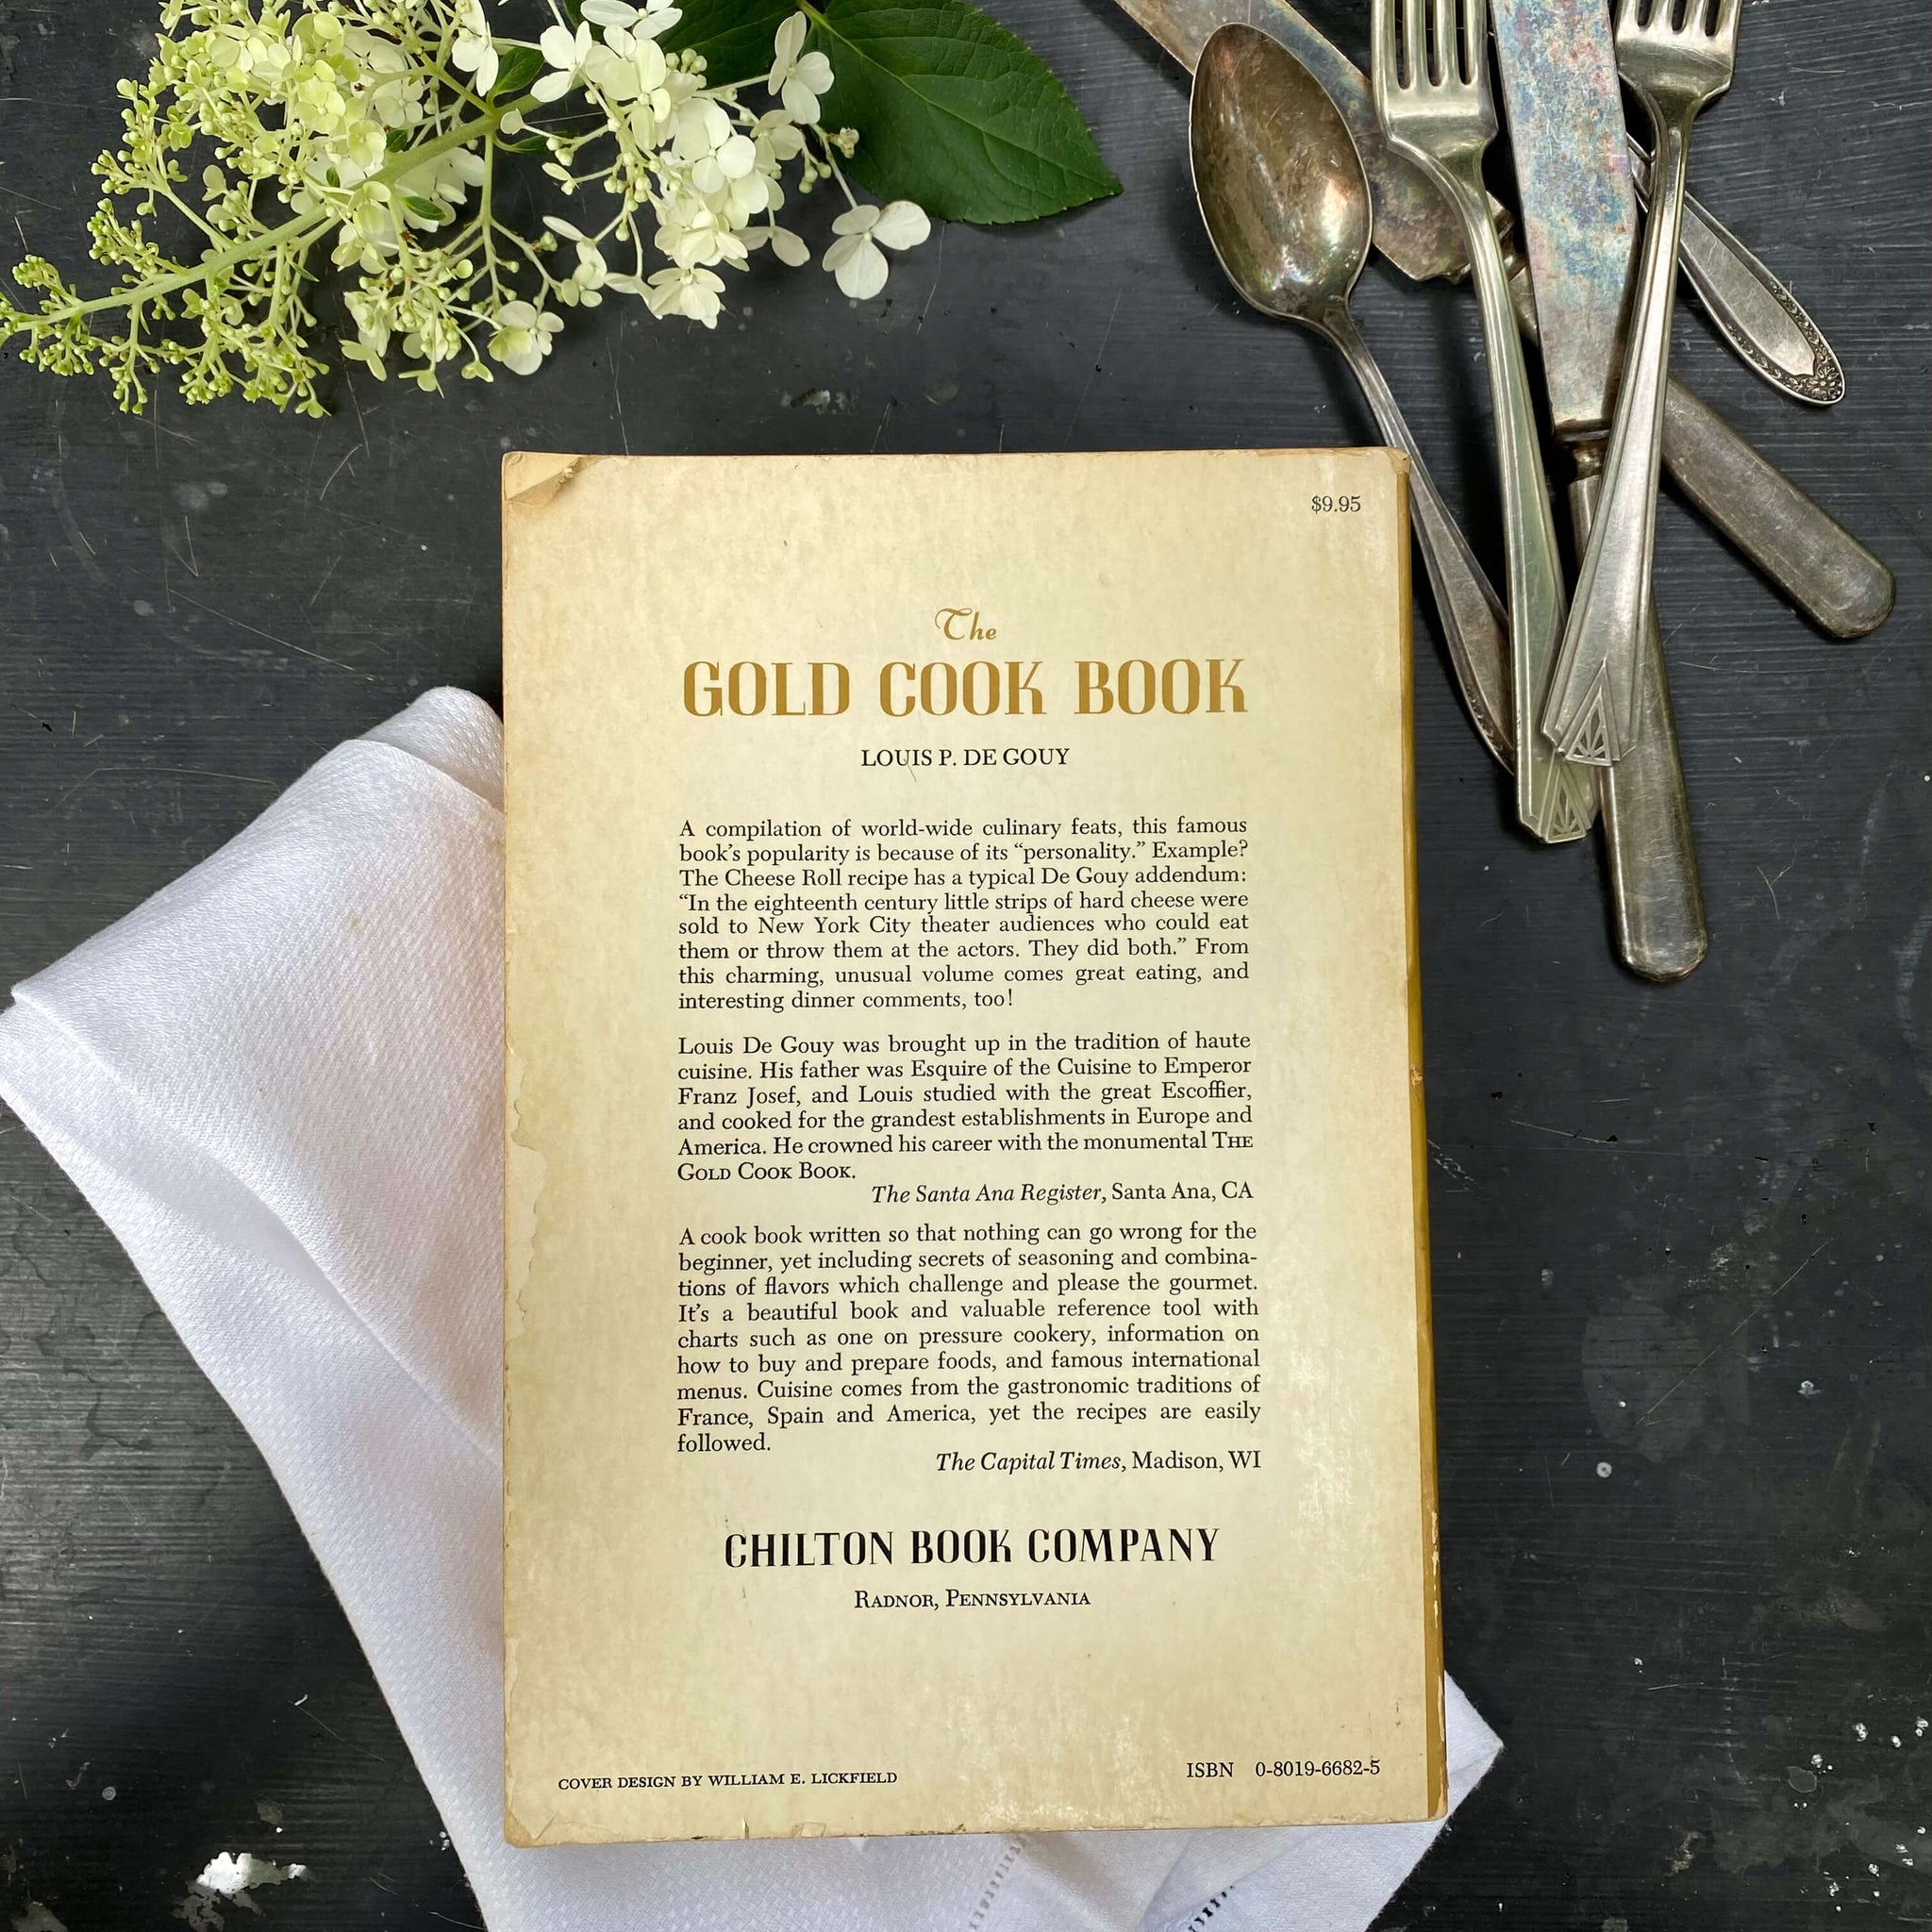 The Gold Cook Book by Louis P. De Gouy - 1970 Edition, 15th Anniversary Printing